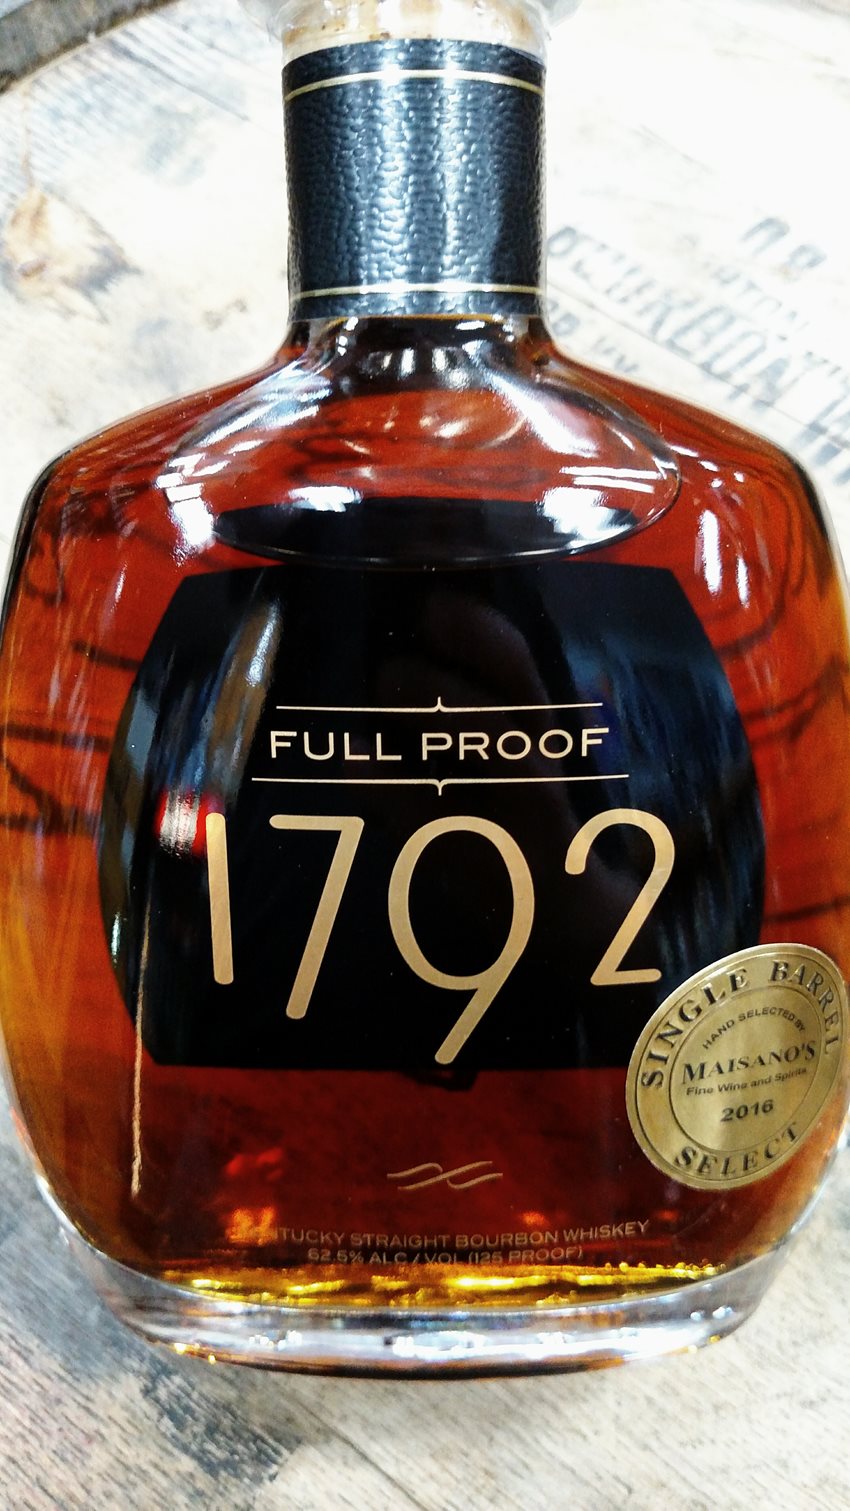 The Maisano Hand Select 1792 Full Proof Bourbon Has Arrived!